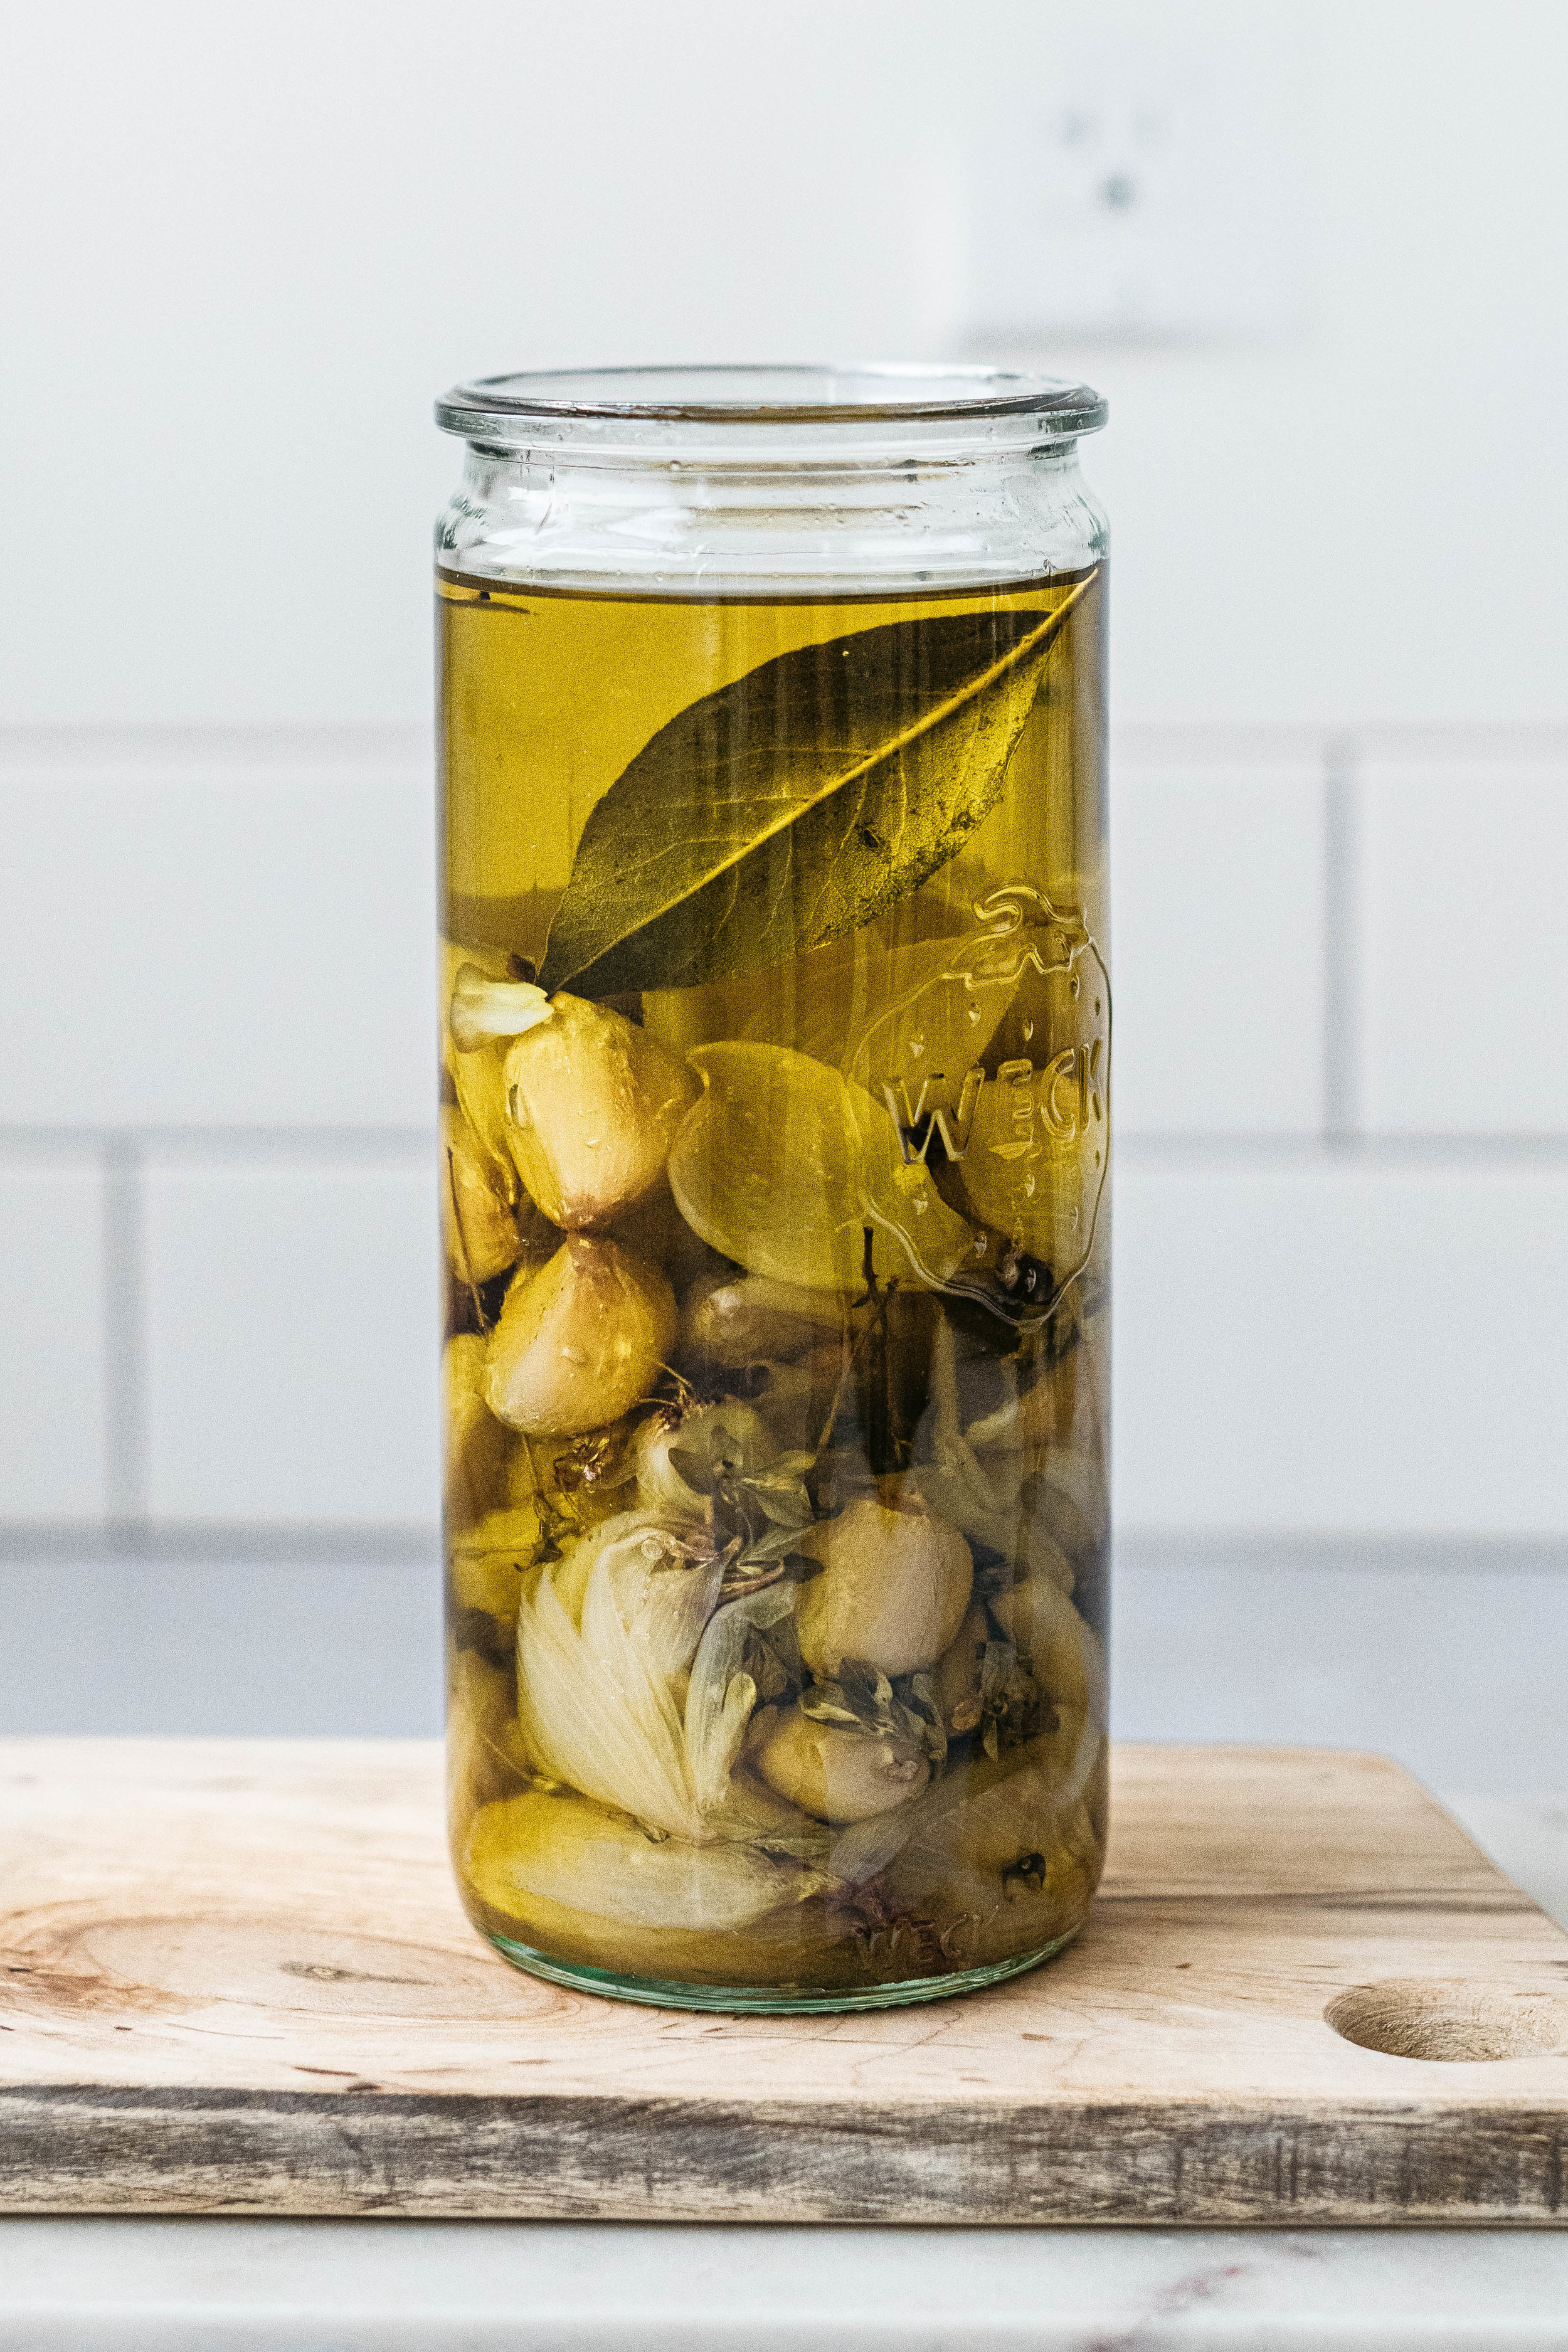 Jalapeño and Shallot Confit Recipe from H-E-B